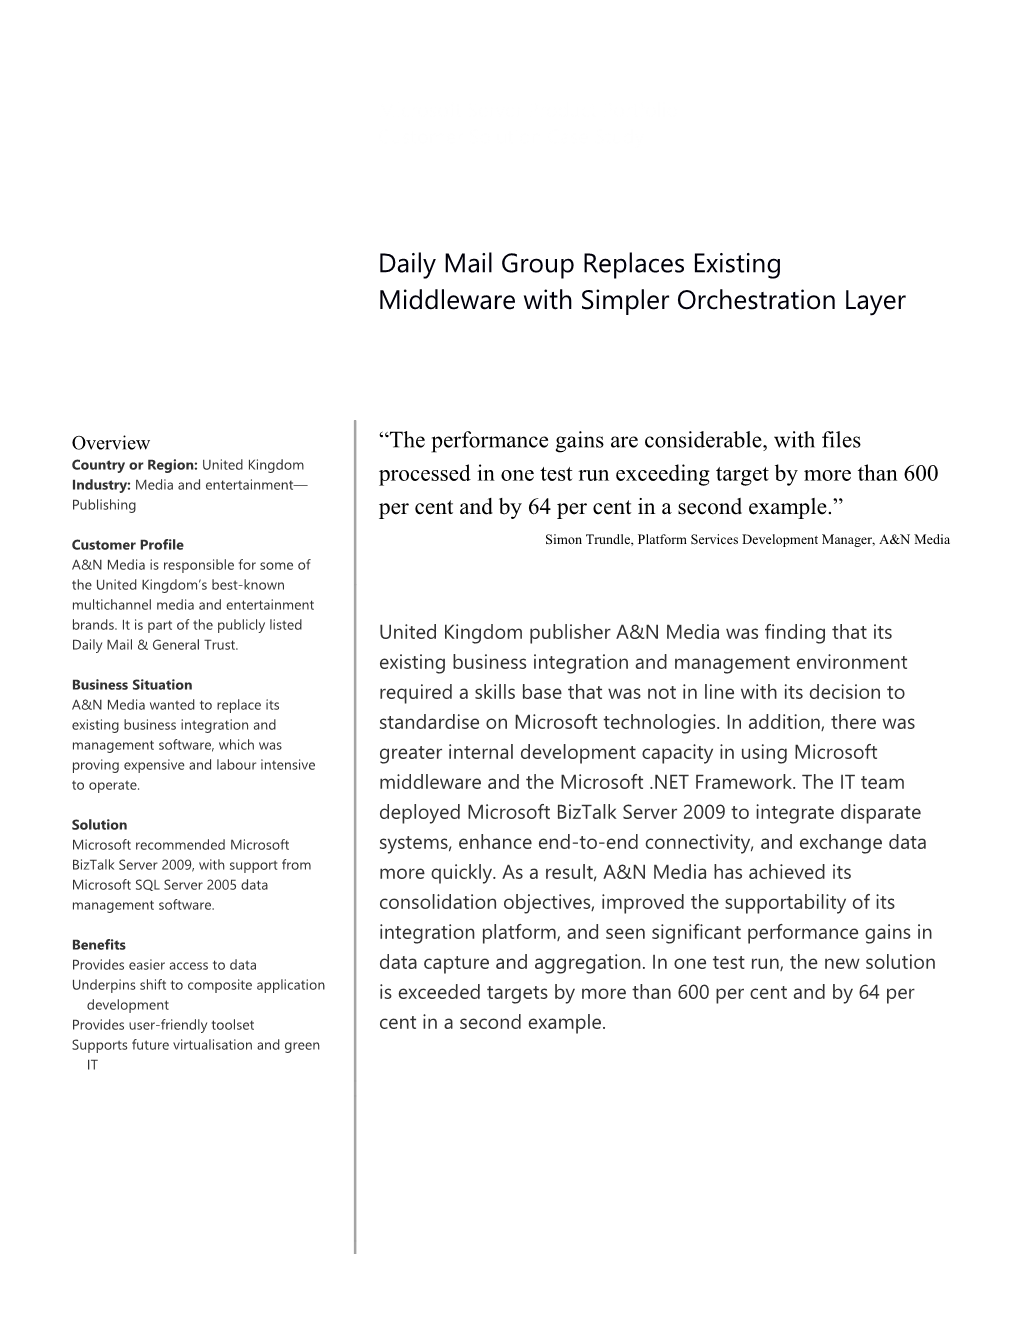 Metia CEP Daily Mail Group Replaces Existing Middleware with Simpler Orchestration Layer